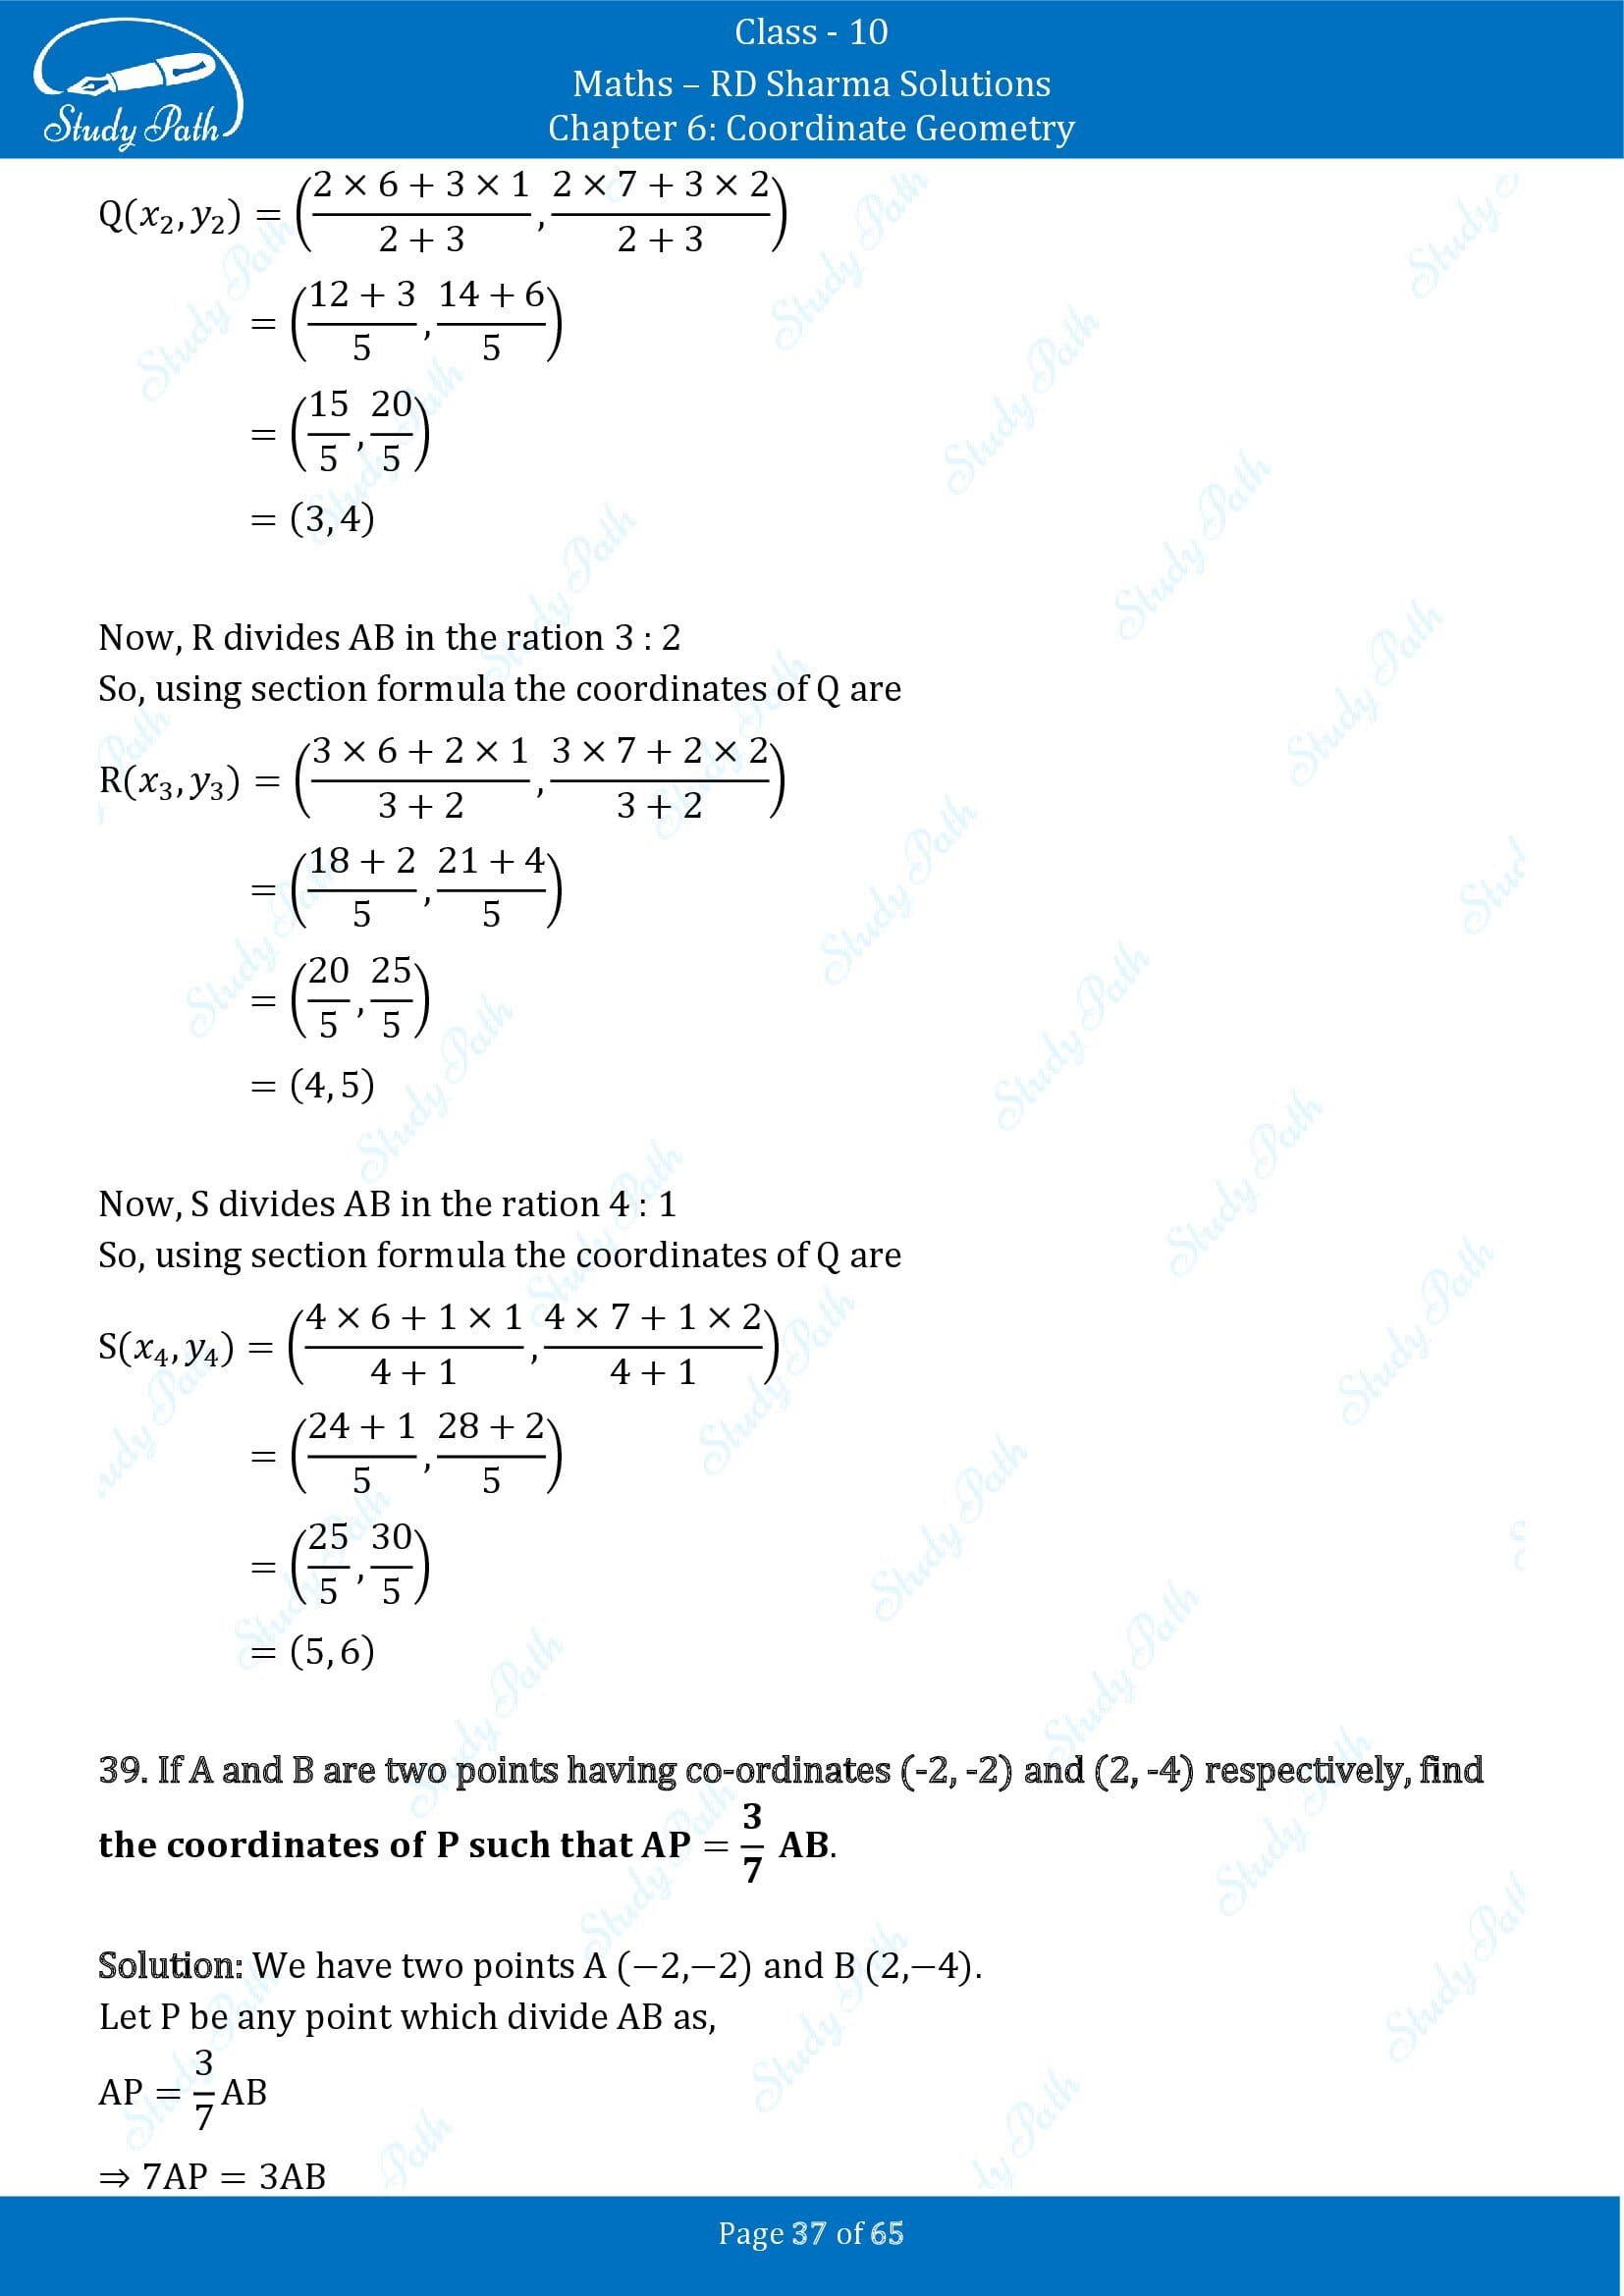 RD Sharma Solutions Class 10 Chapter 6 Coordinate Geometry Exercise 6.3 00037